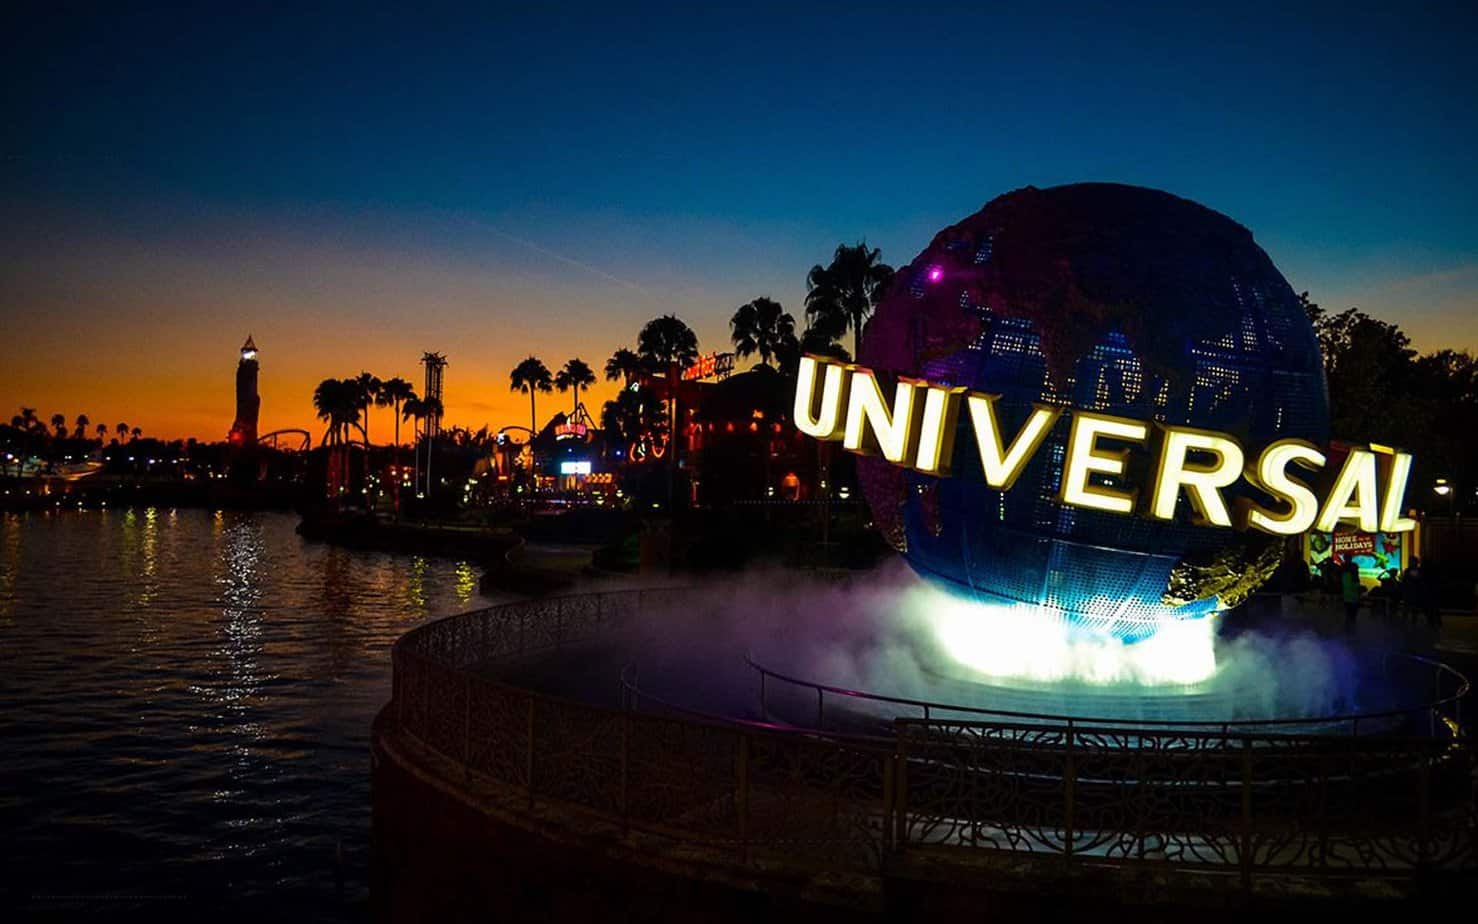 MOVIES ON DEMAND EARLY - Universal Studios is attempting to make up